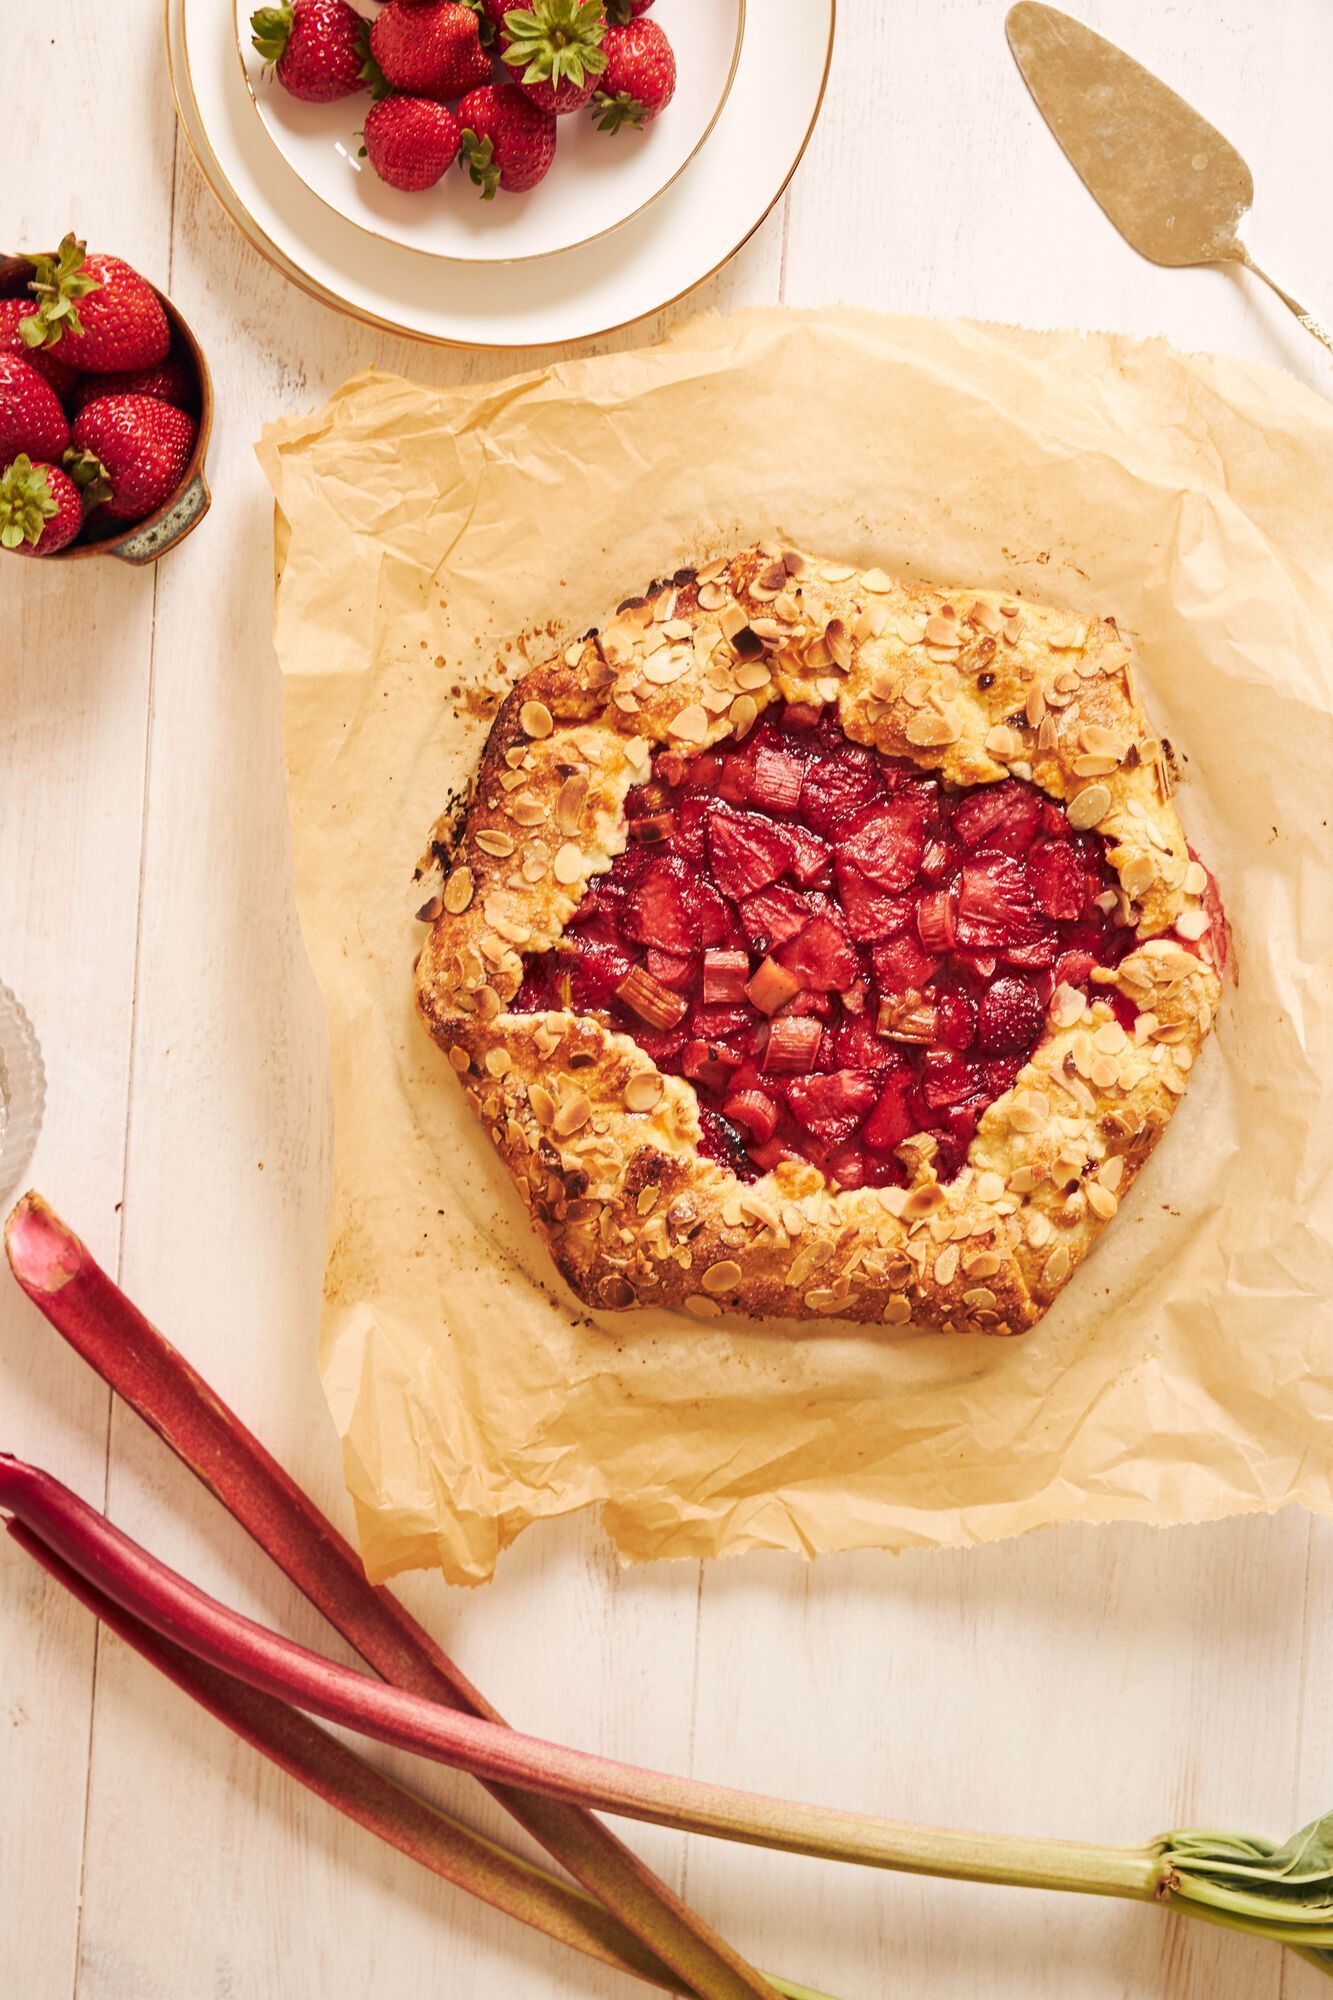 Strawberry galette with cottage cheese: a simple dish with incredible flavor